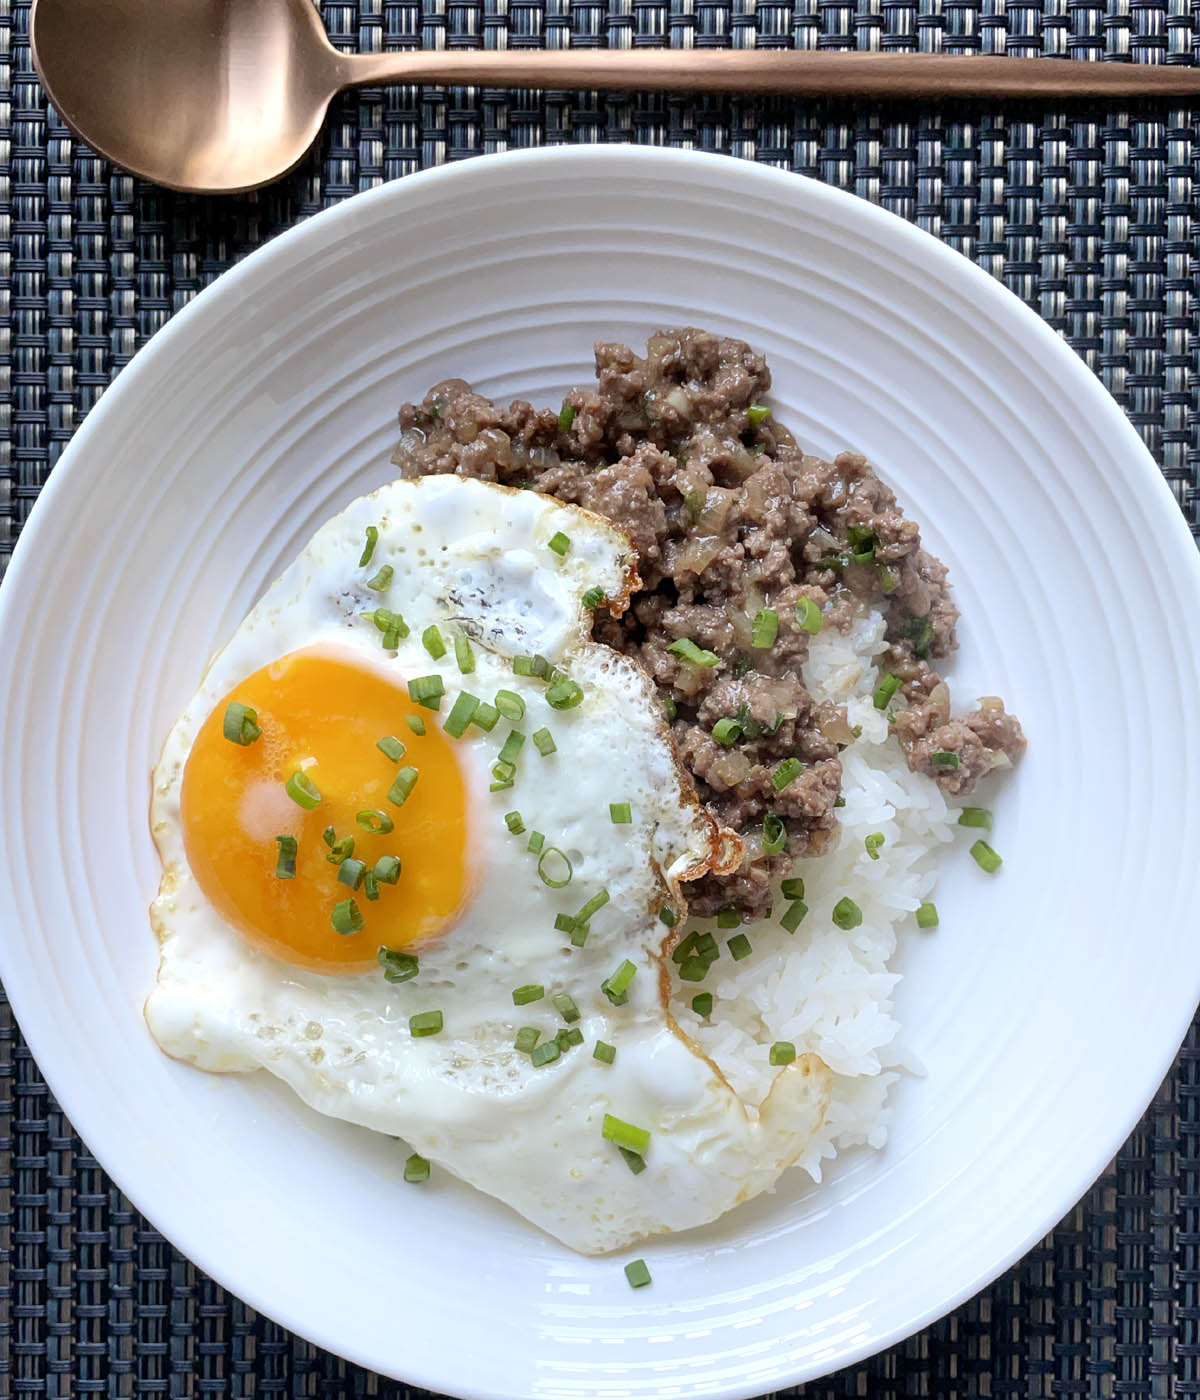 A round white dish containing white rice, ground meat, a sunny-side up fried egg, and chopped green onions.